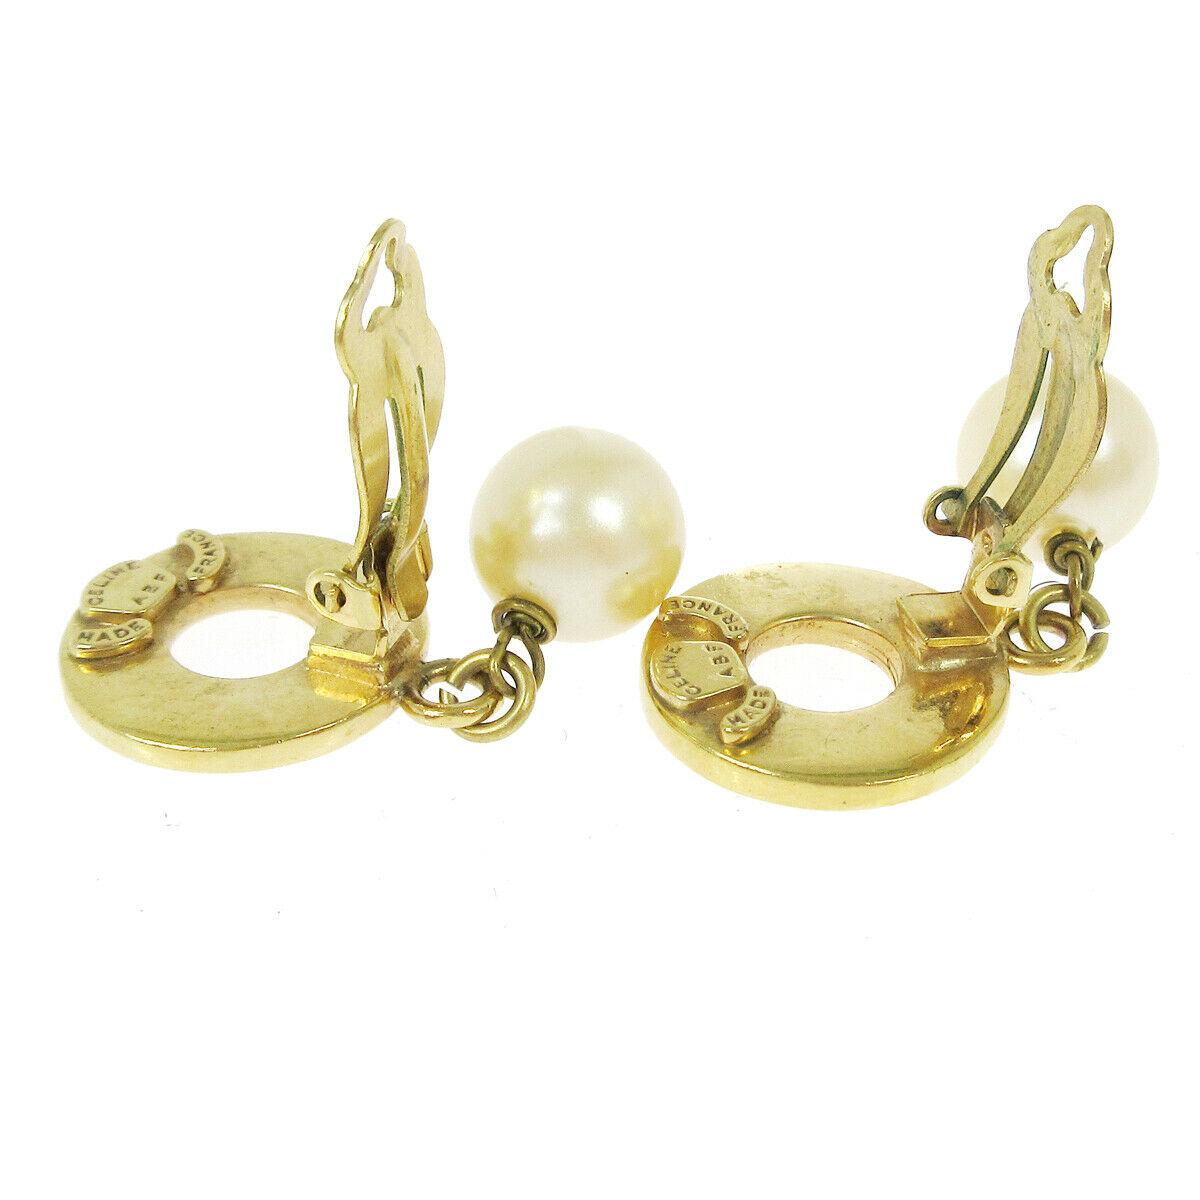 
Metal
Gold tone
Faux pearl
Clip on closure
Made in France
Width 0.75